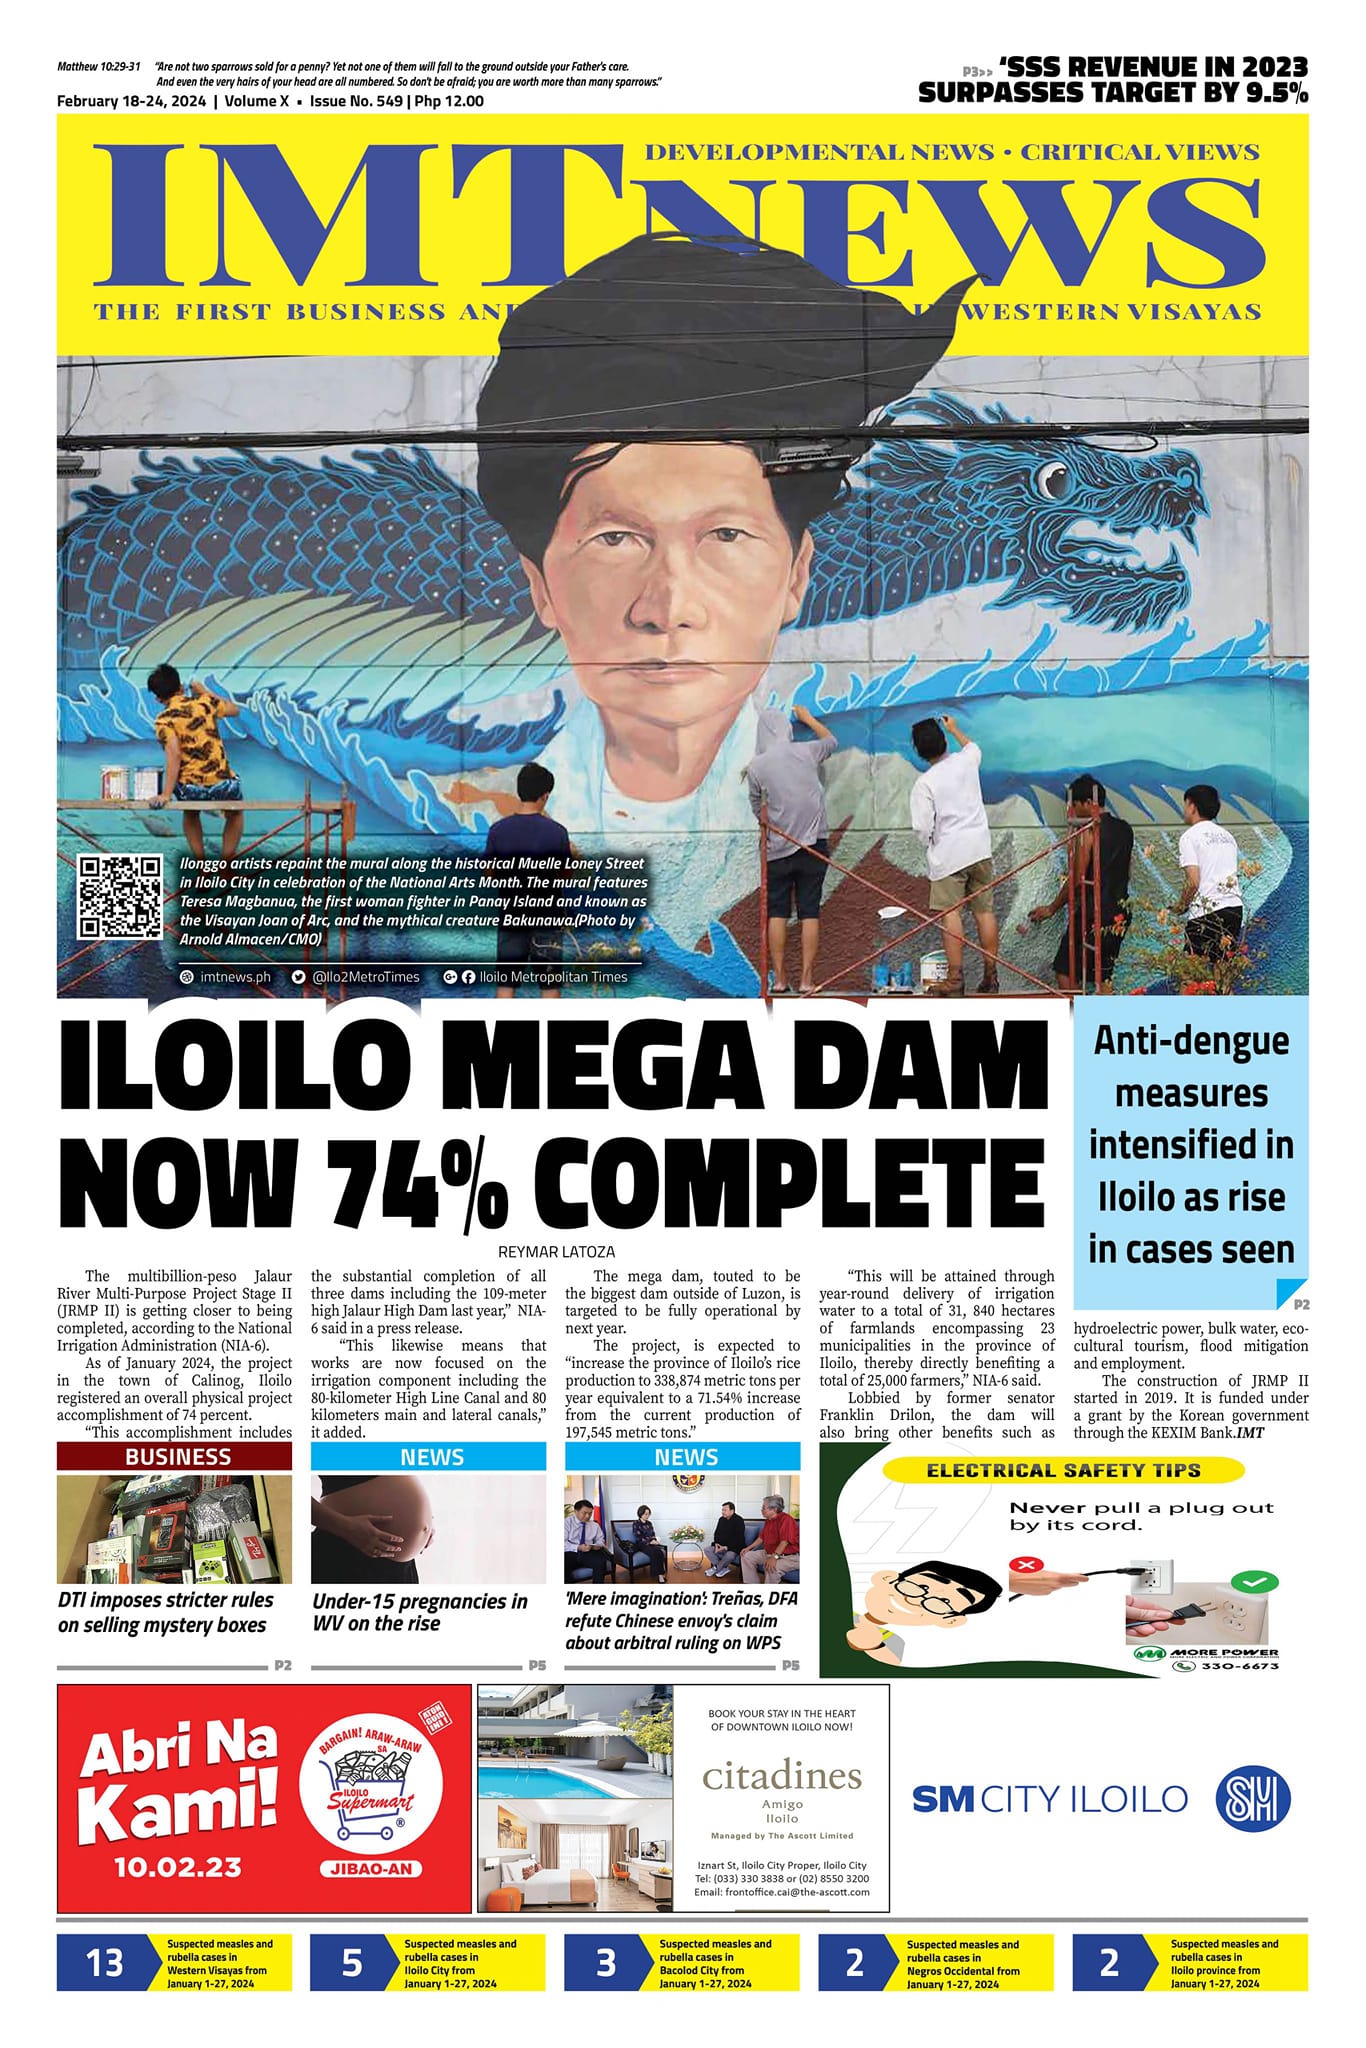 THIS WEEK'S FRONT PAGE (February 18-24, 2023)